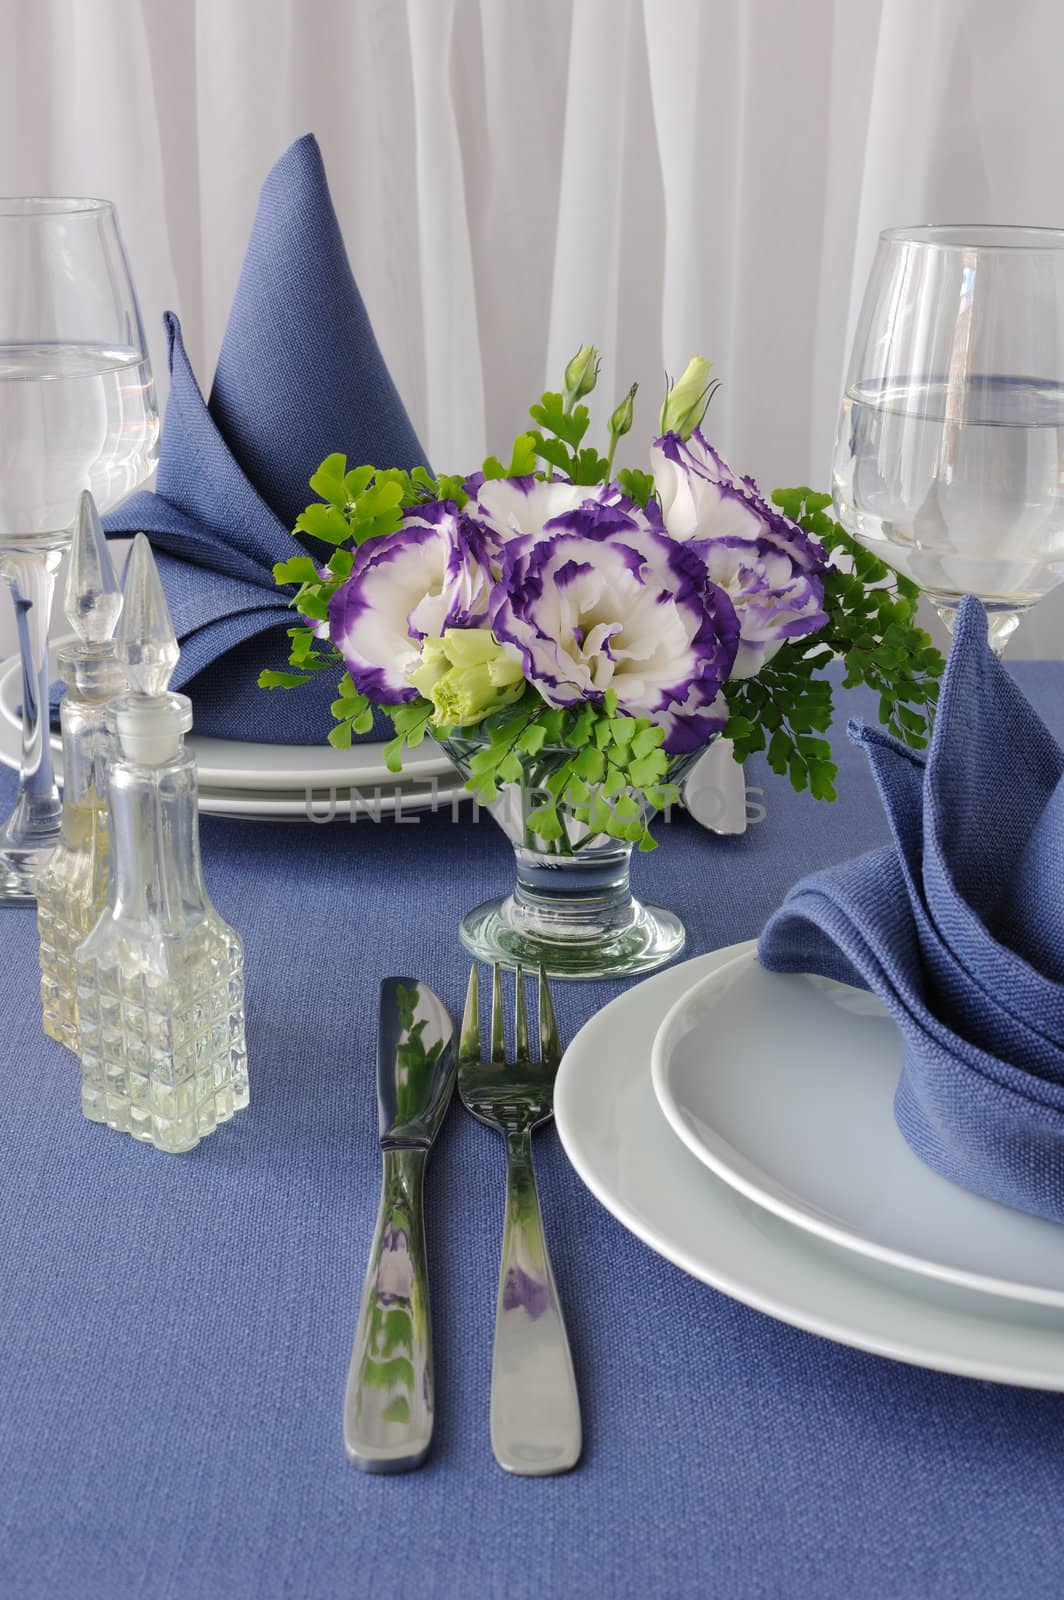 Flowers as part of a table setting